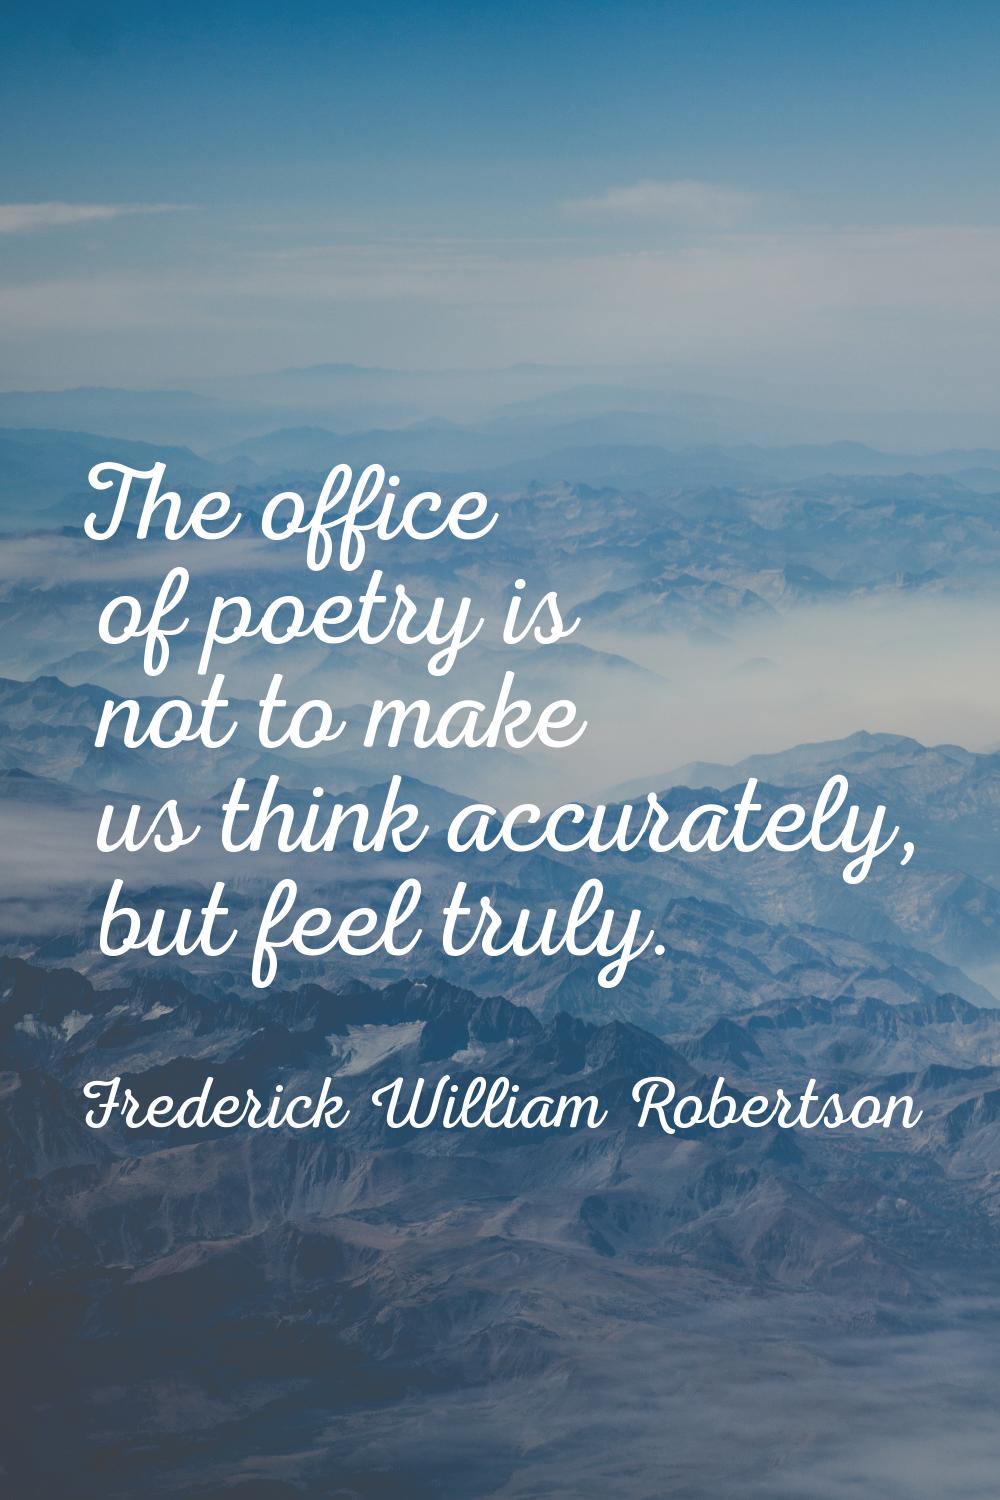 The office of poetry is not to make us think accurately, but feel truly.